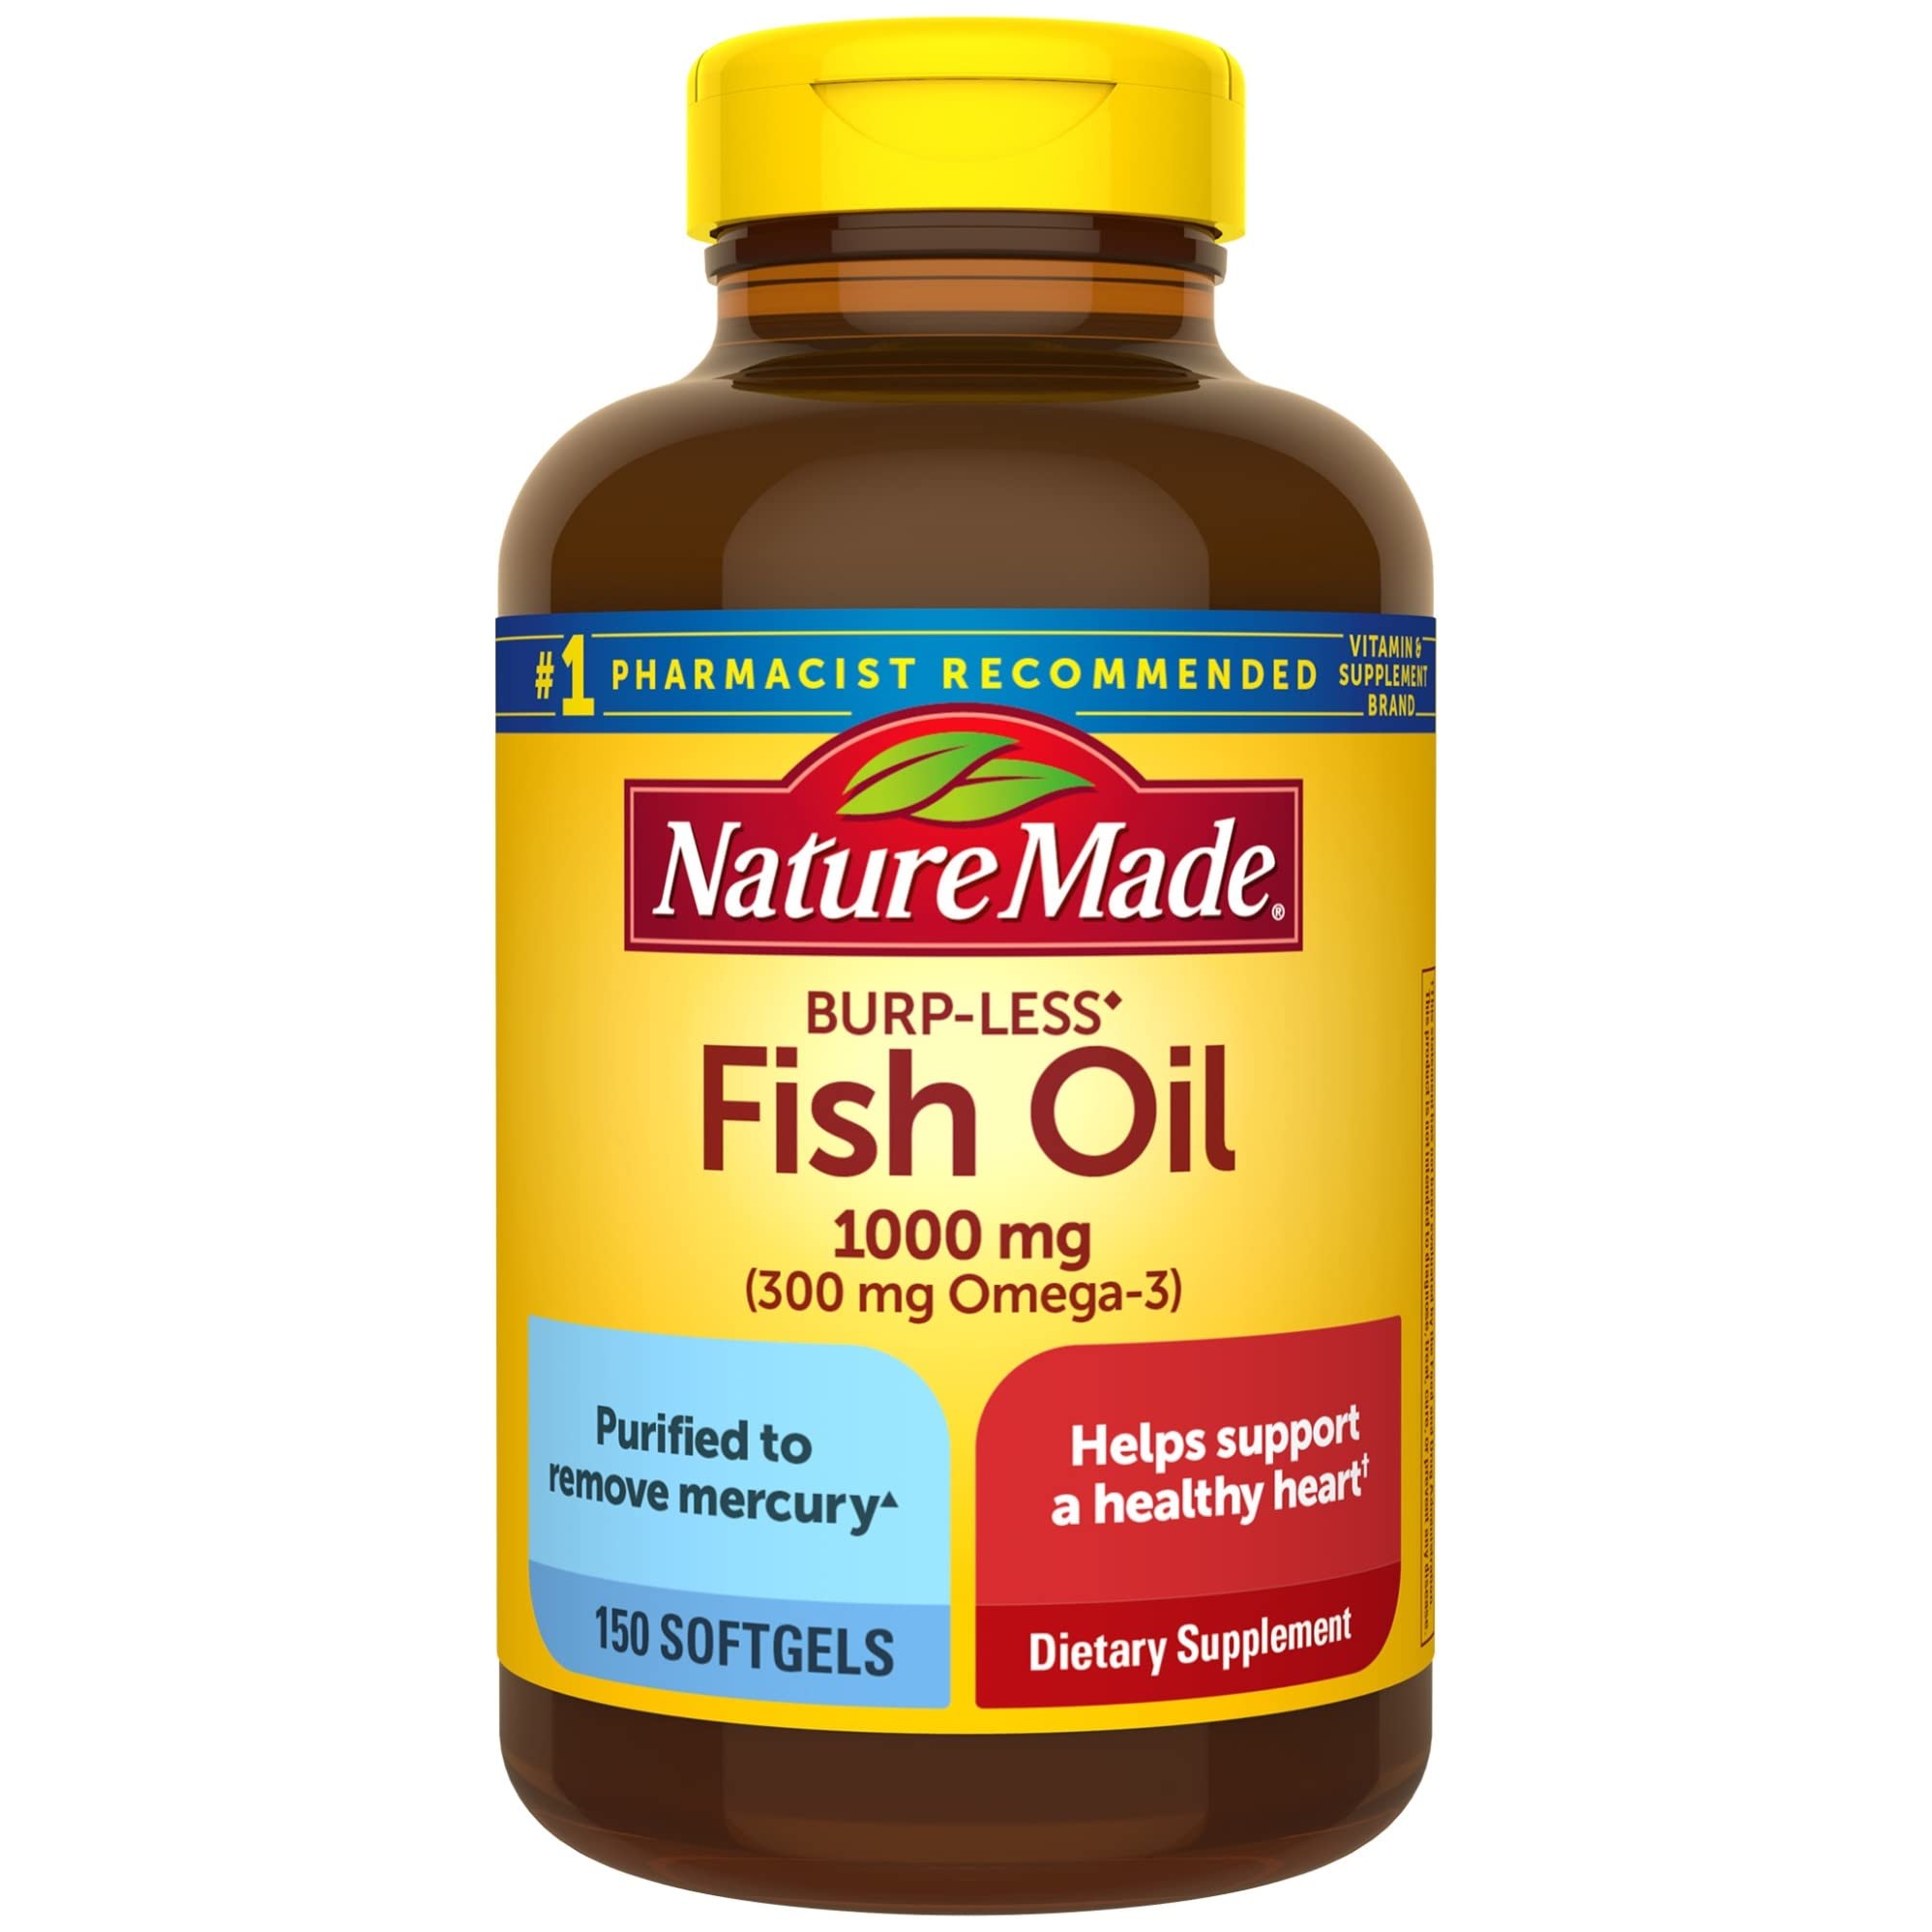 Nature Made Burp Less Fish Oil 1000 mg Softgels, Omega 3 Fish Oil Supplements for Healthy Heart Support, Omega 3 Supplement with